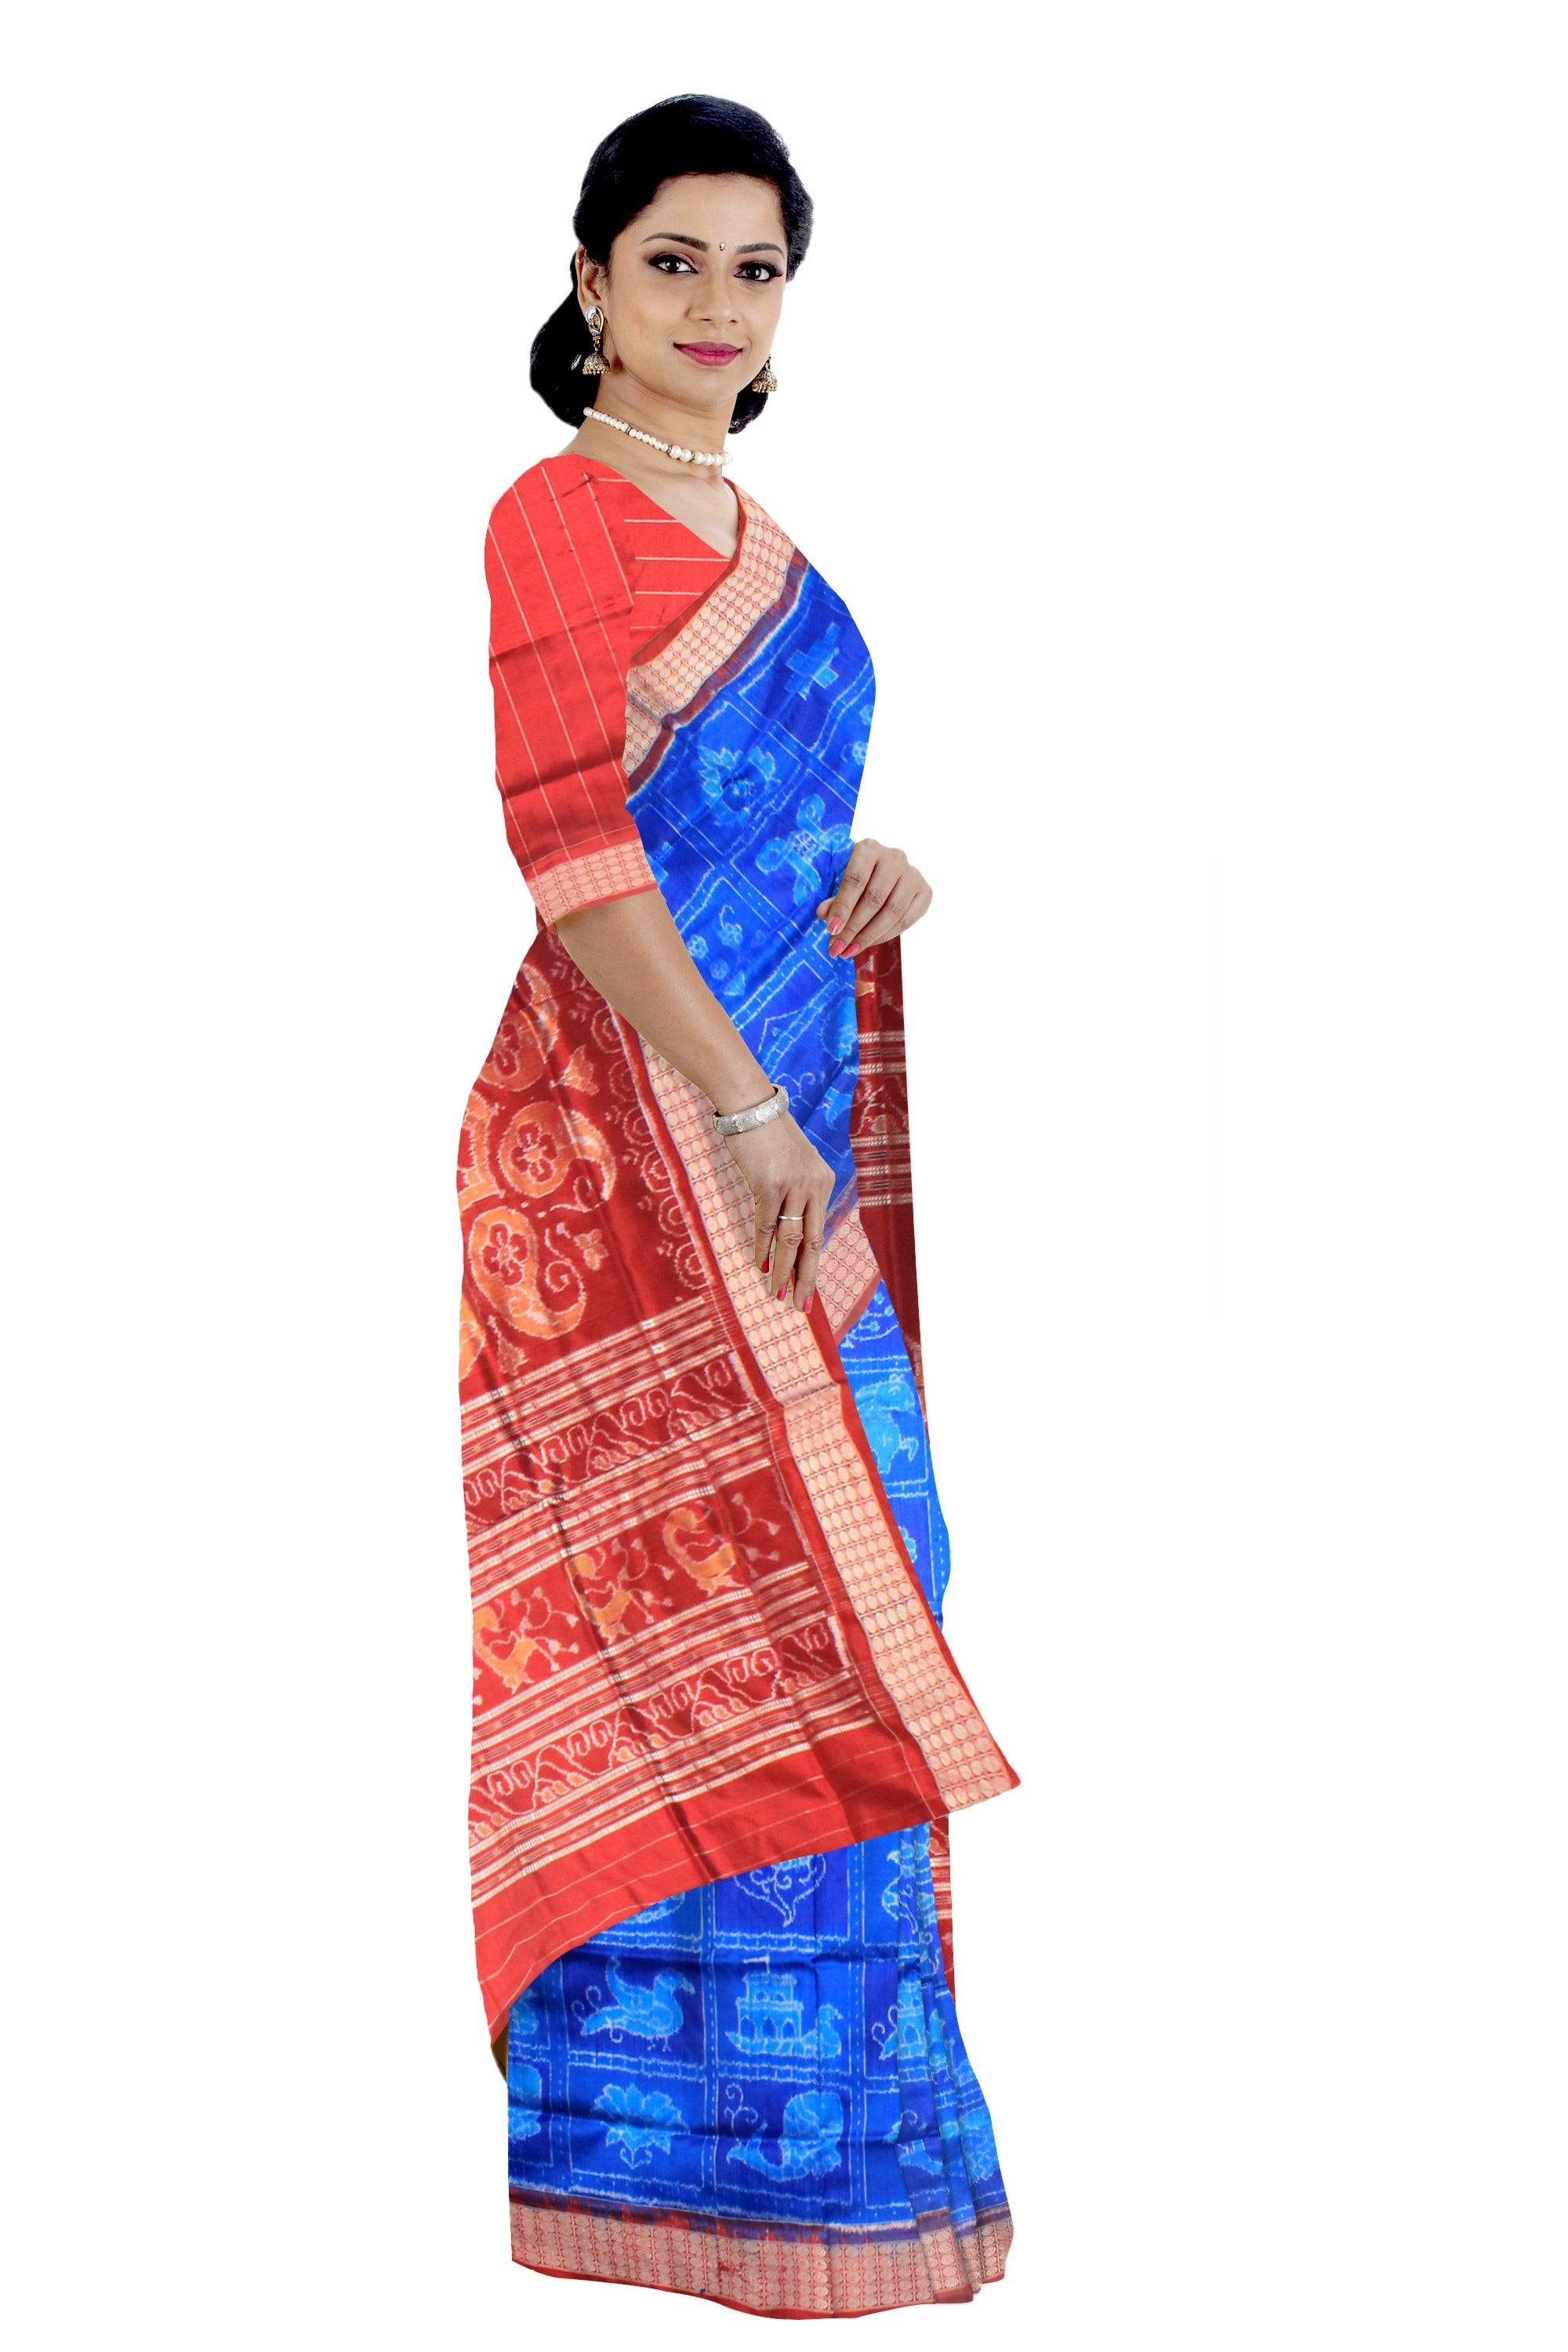 BODY IN BLUE AND RED COLORS WITH TRADITIONAL NABAKOTHI DESIGN SONEPUR PURE PATA SAREE, WITH BLOUSE PIECE. - Koshali Arts & Crafts Enterprise